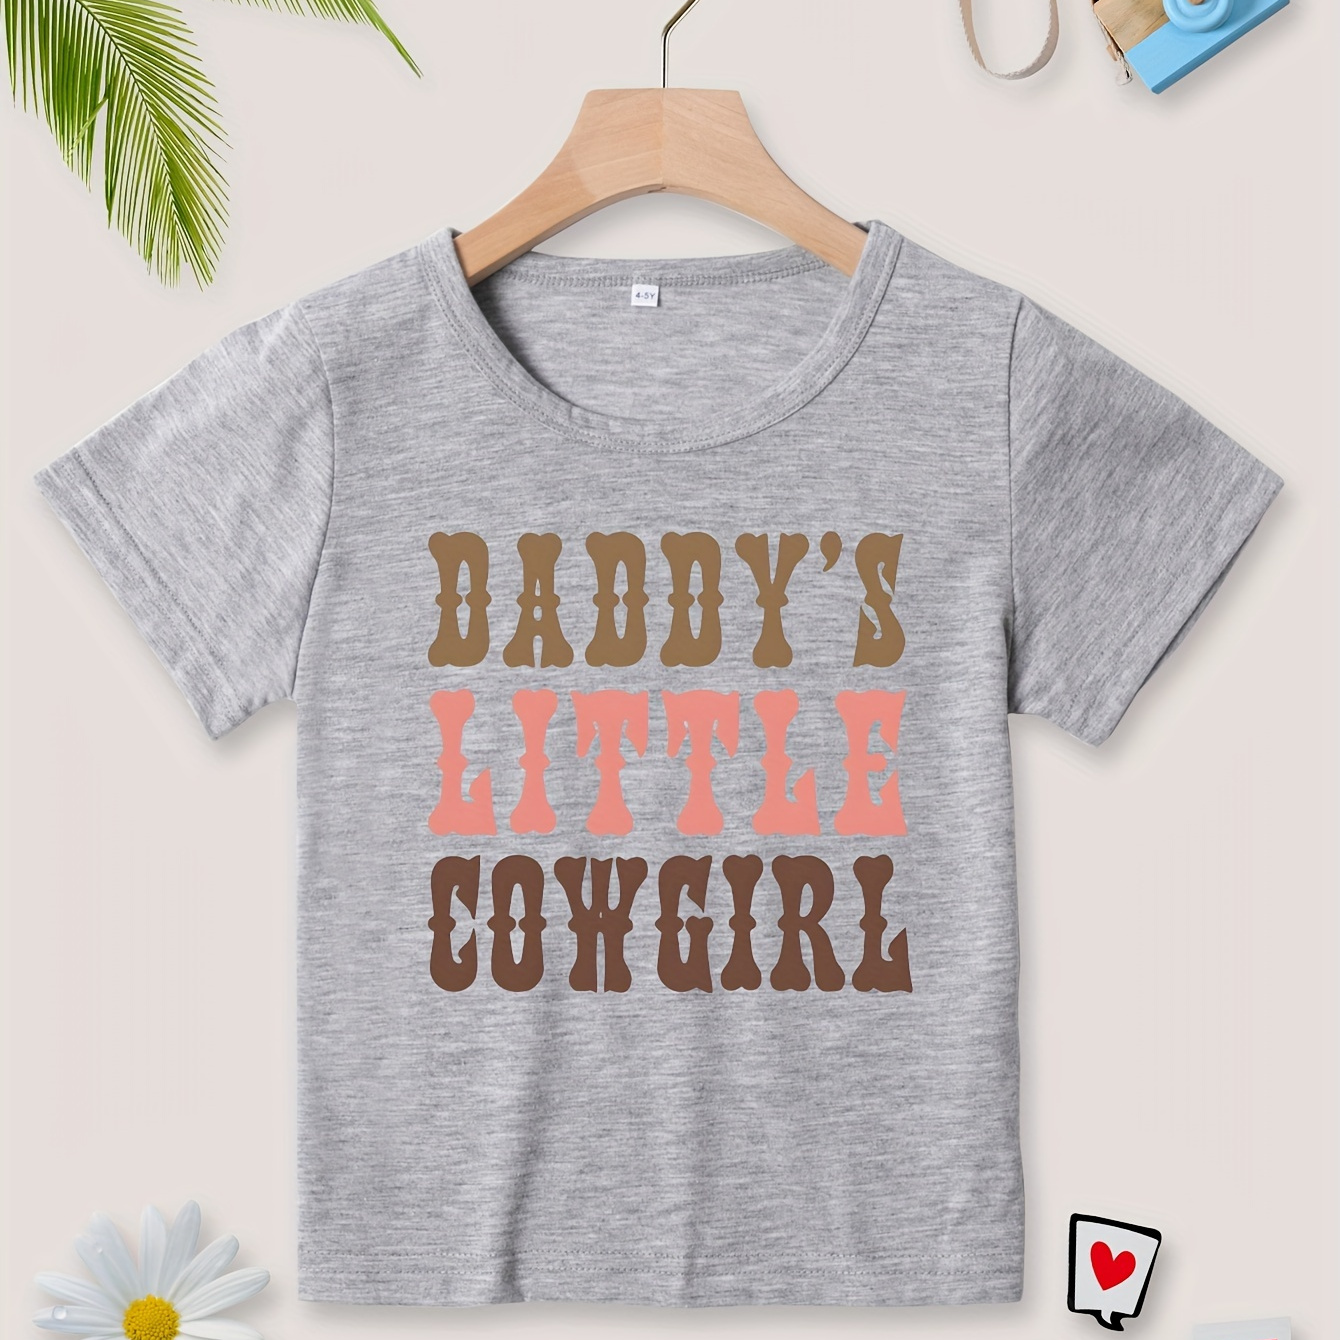 

daddy's Little Cow Girl" Print T-shirt For Girls, Casual Short Sleeve Top, Girl's Clothing For Summer